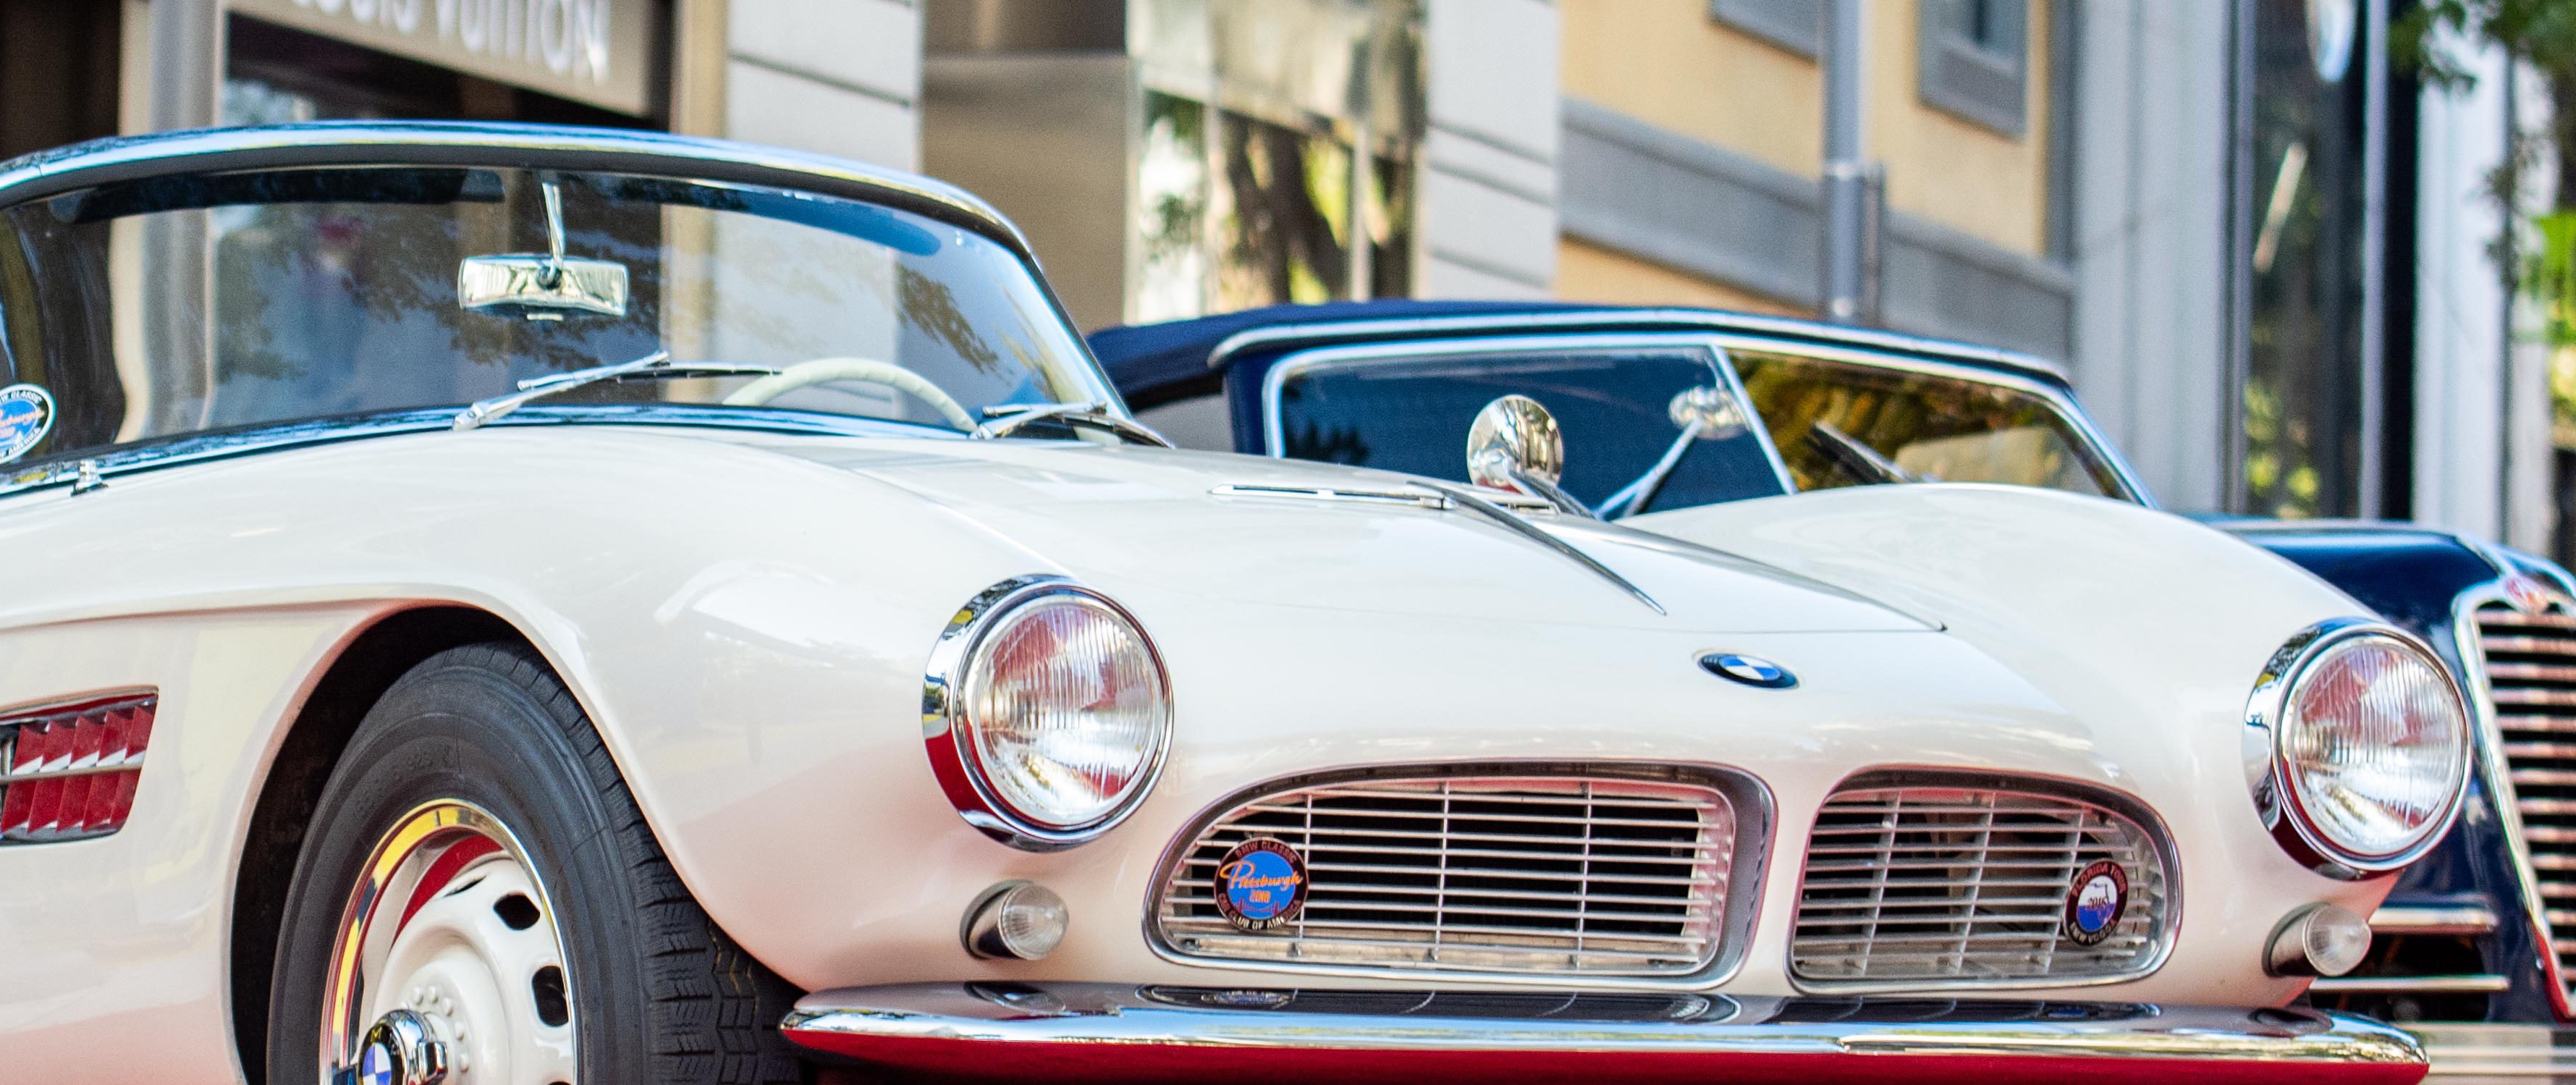 Miami Concours Car Show At The Design District